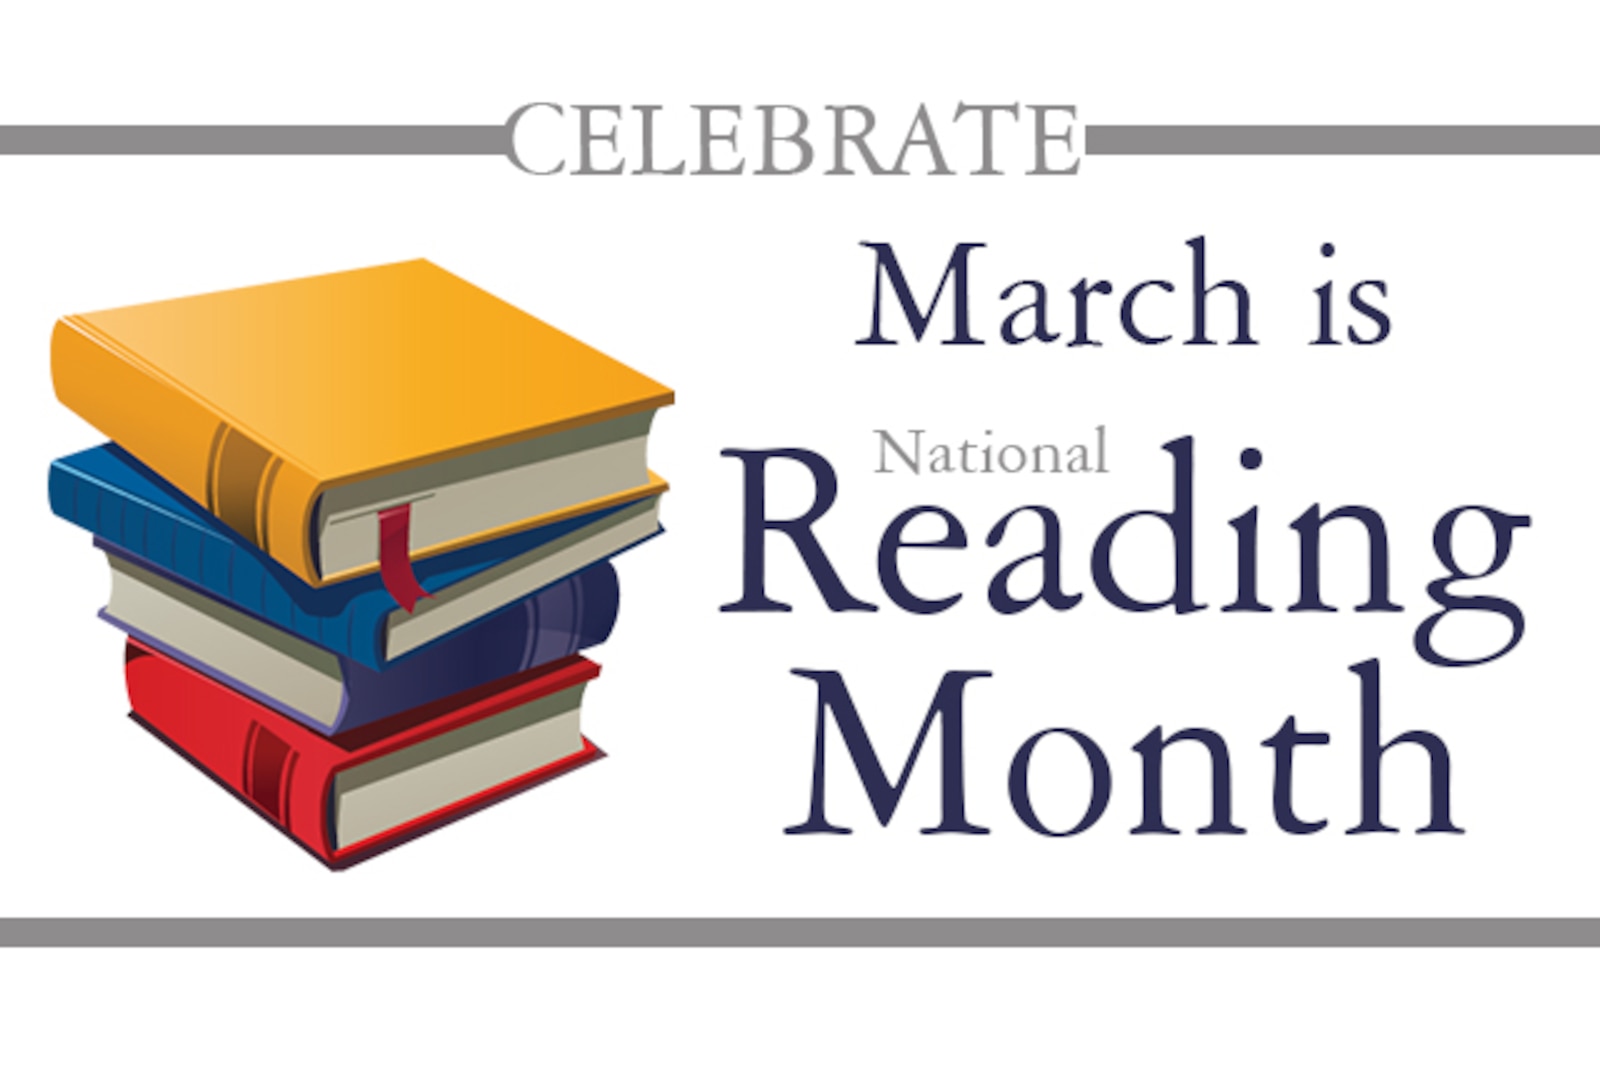 March is National Reading Month.